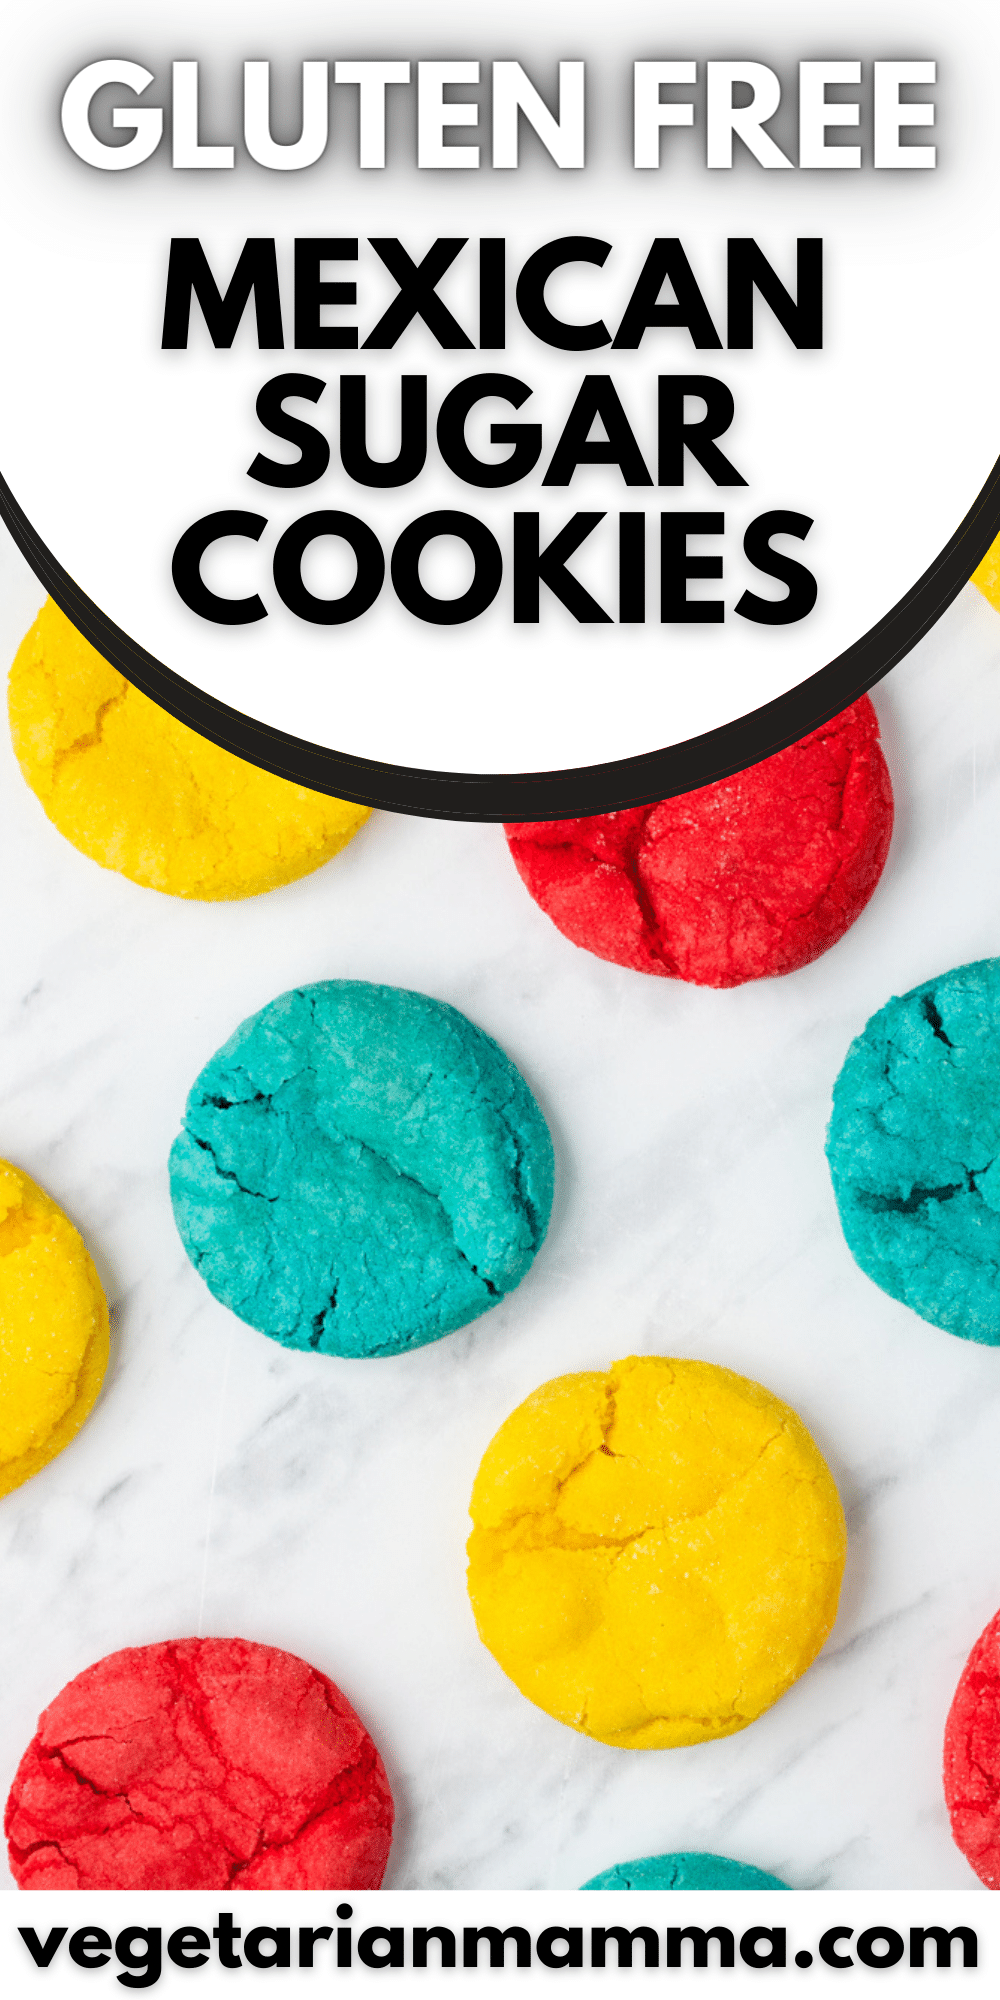 Soft and chewy, and super bright and colorful, these gluten-free Mexican Sugar Cookies are sure to put a smile on anyone's face!